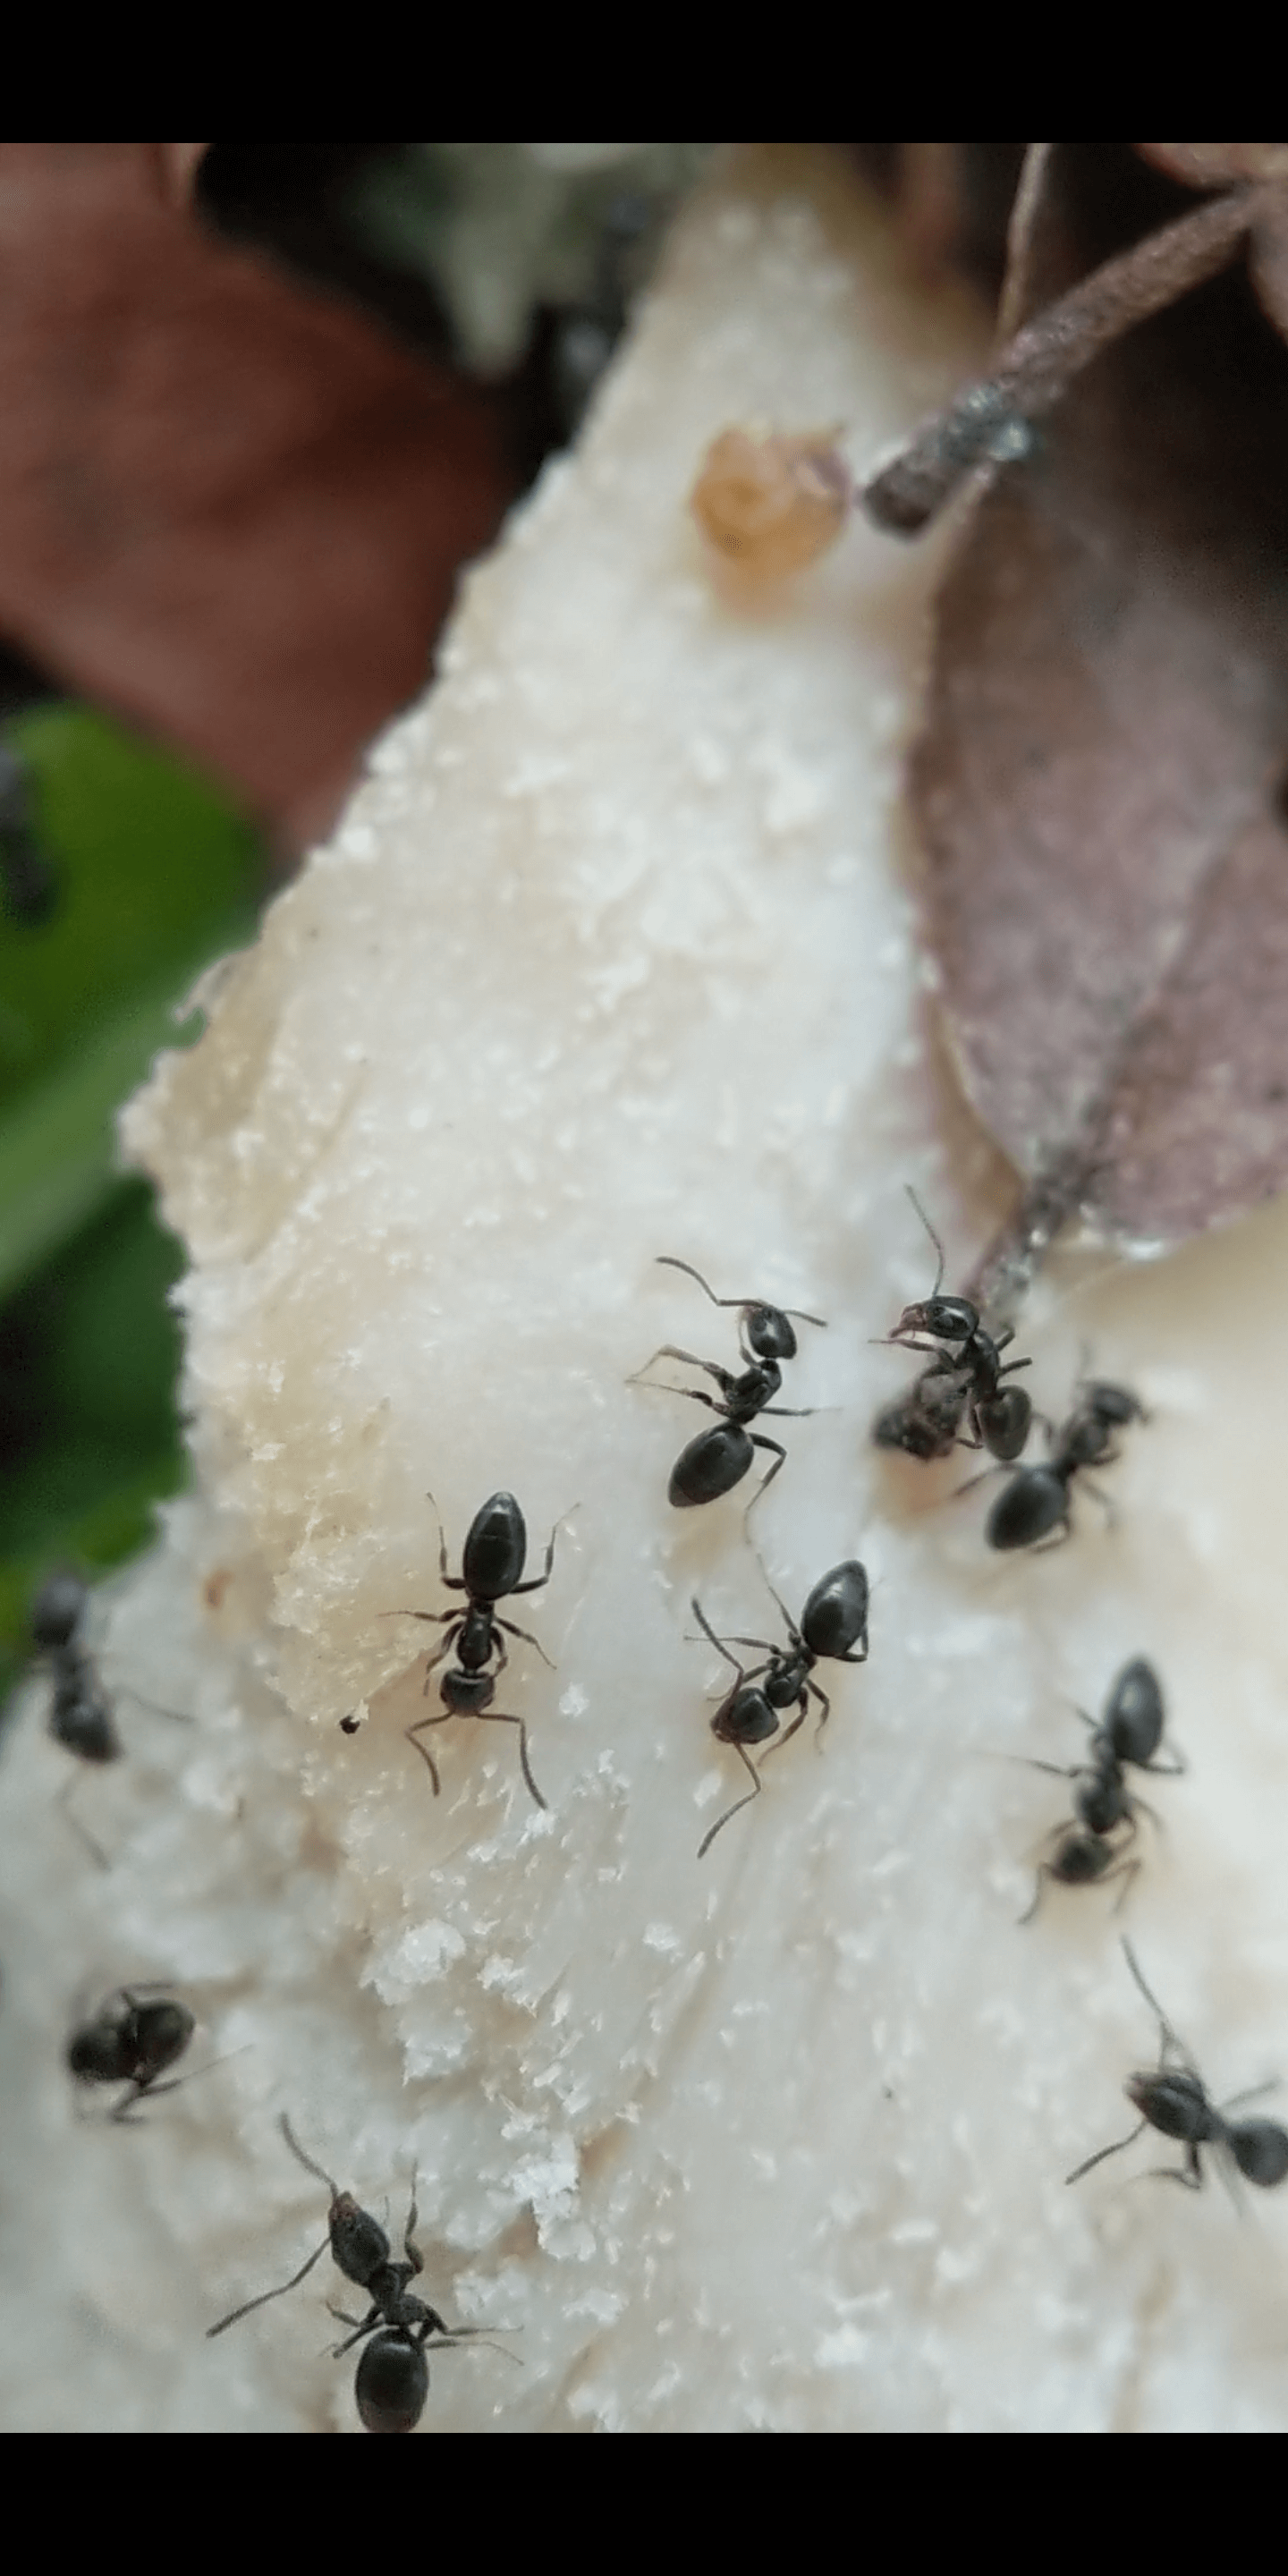 A colony of odorous house ants that are on the move.